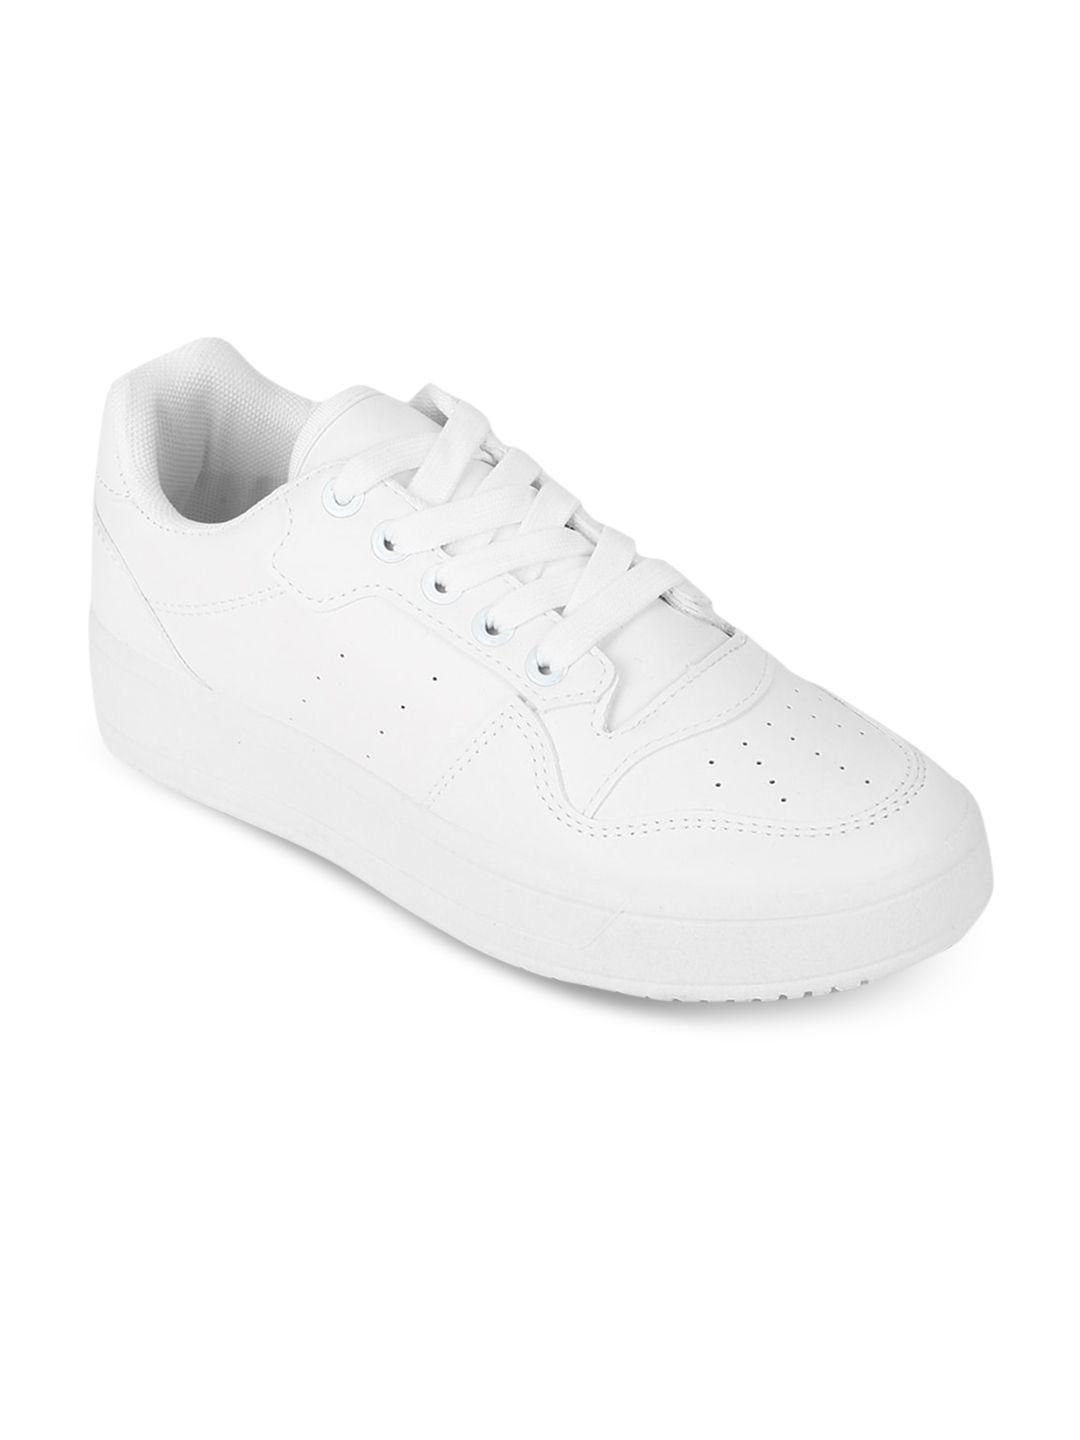 truffle collection women white pu sneakers